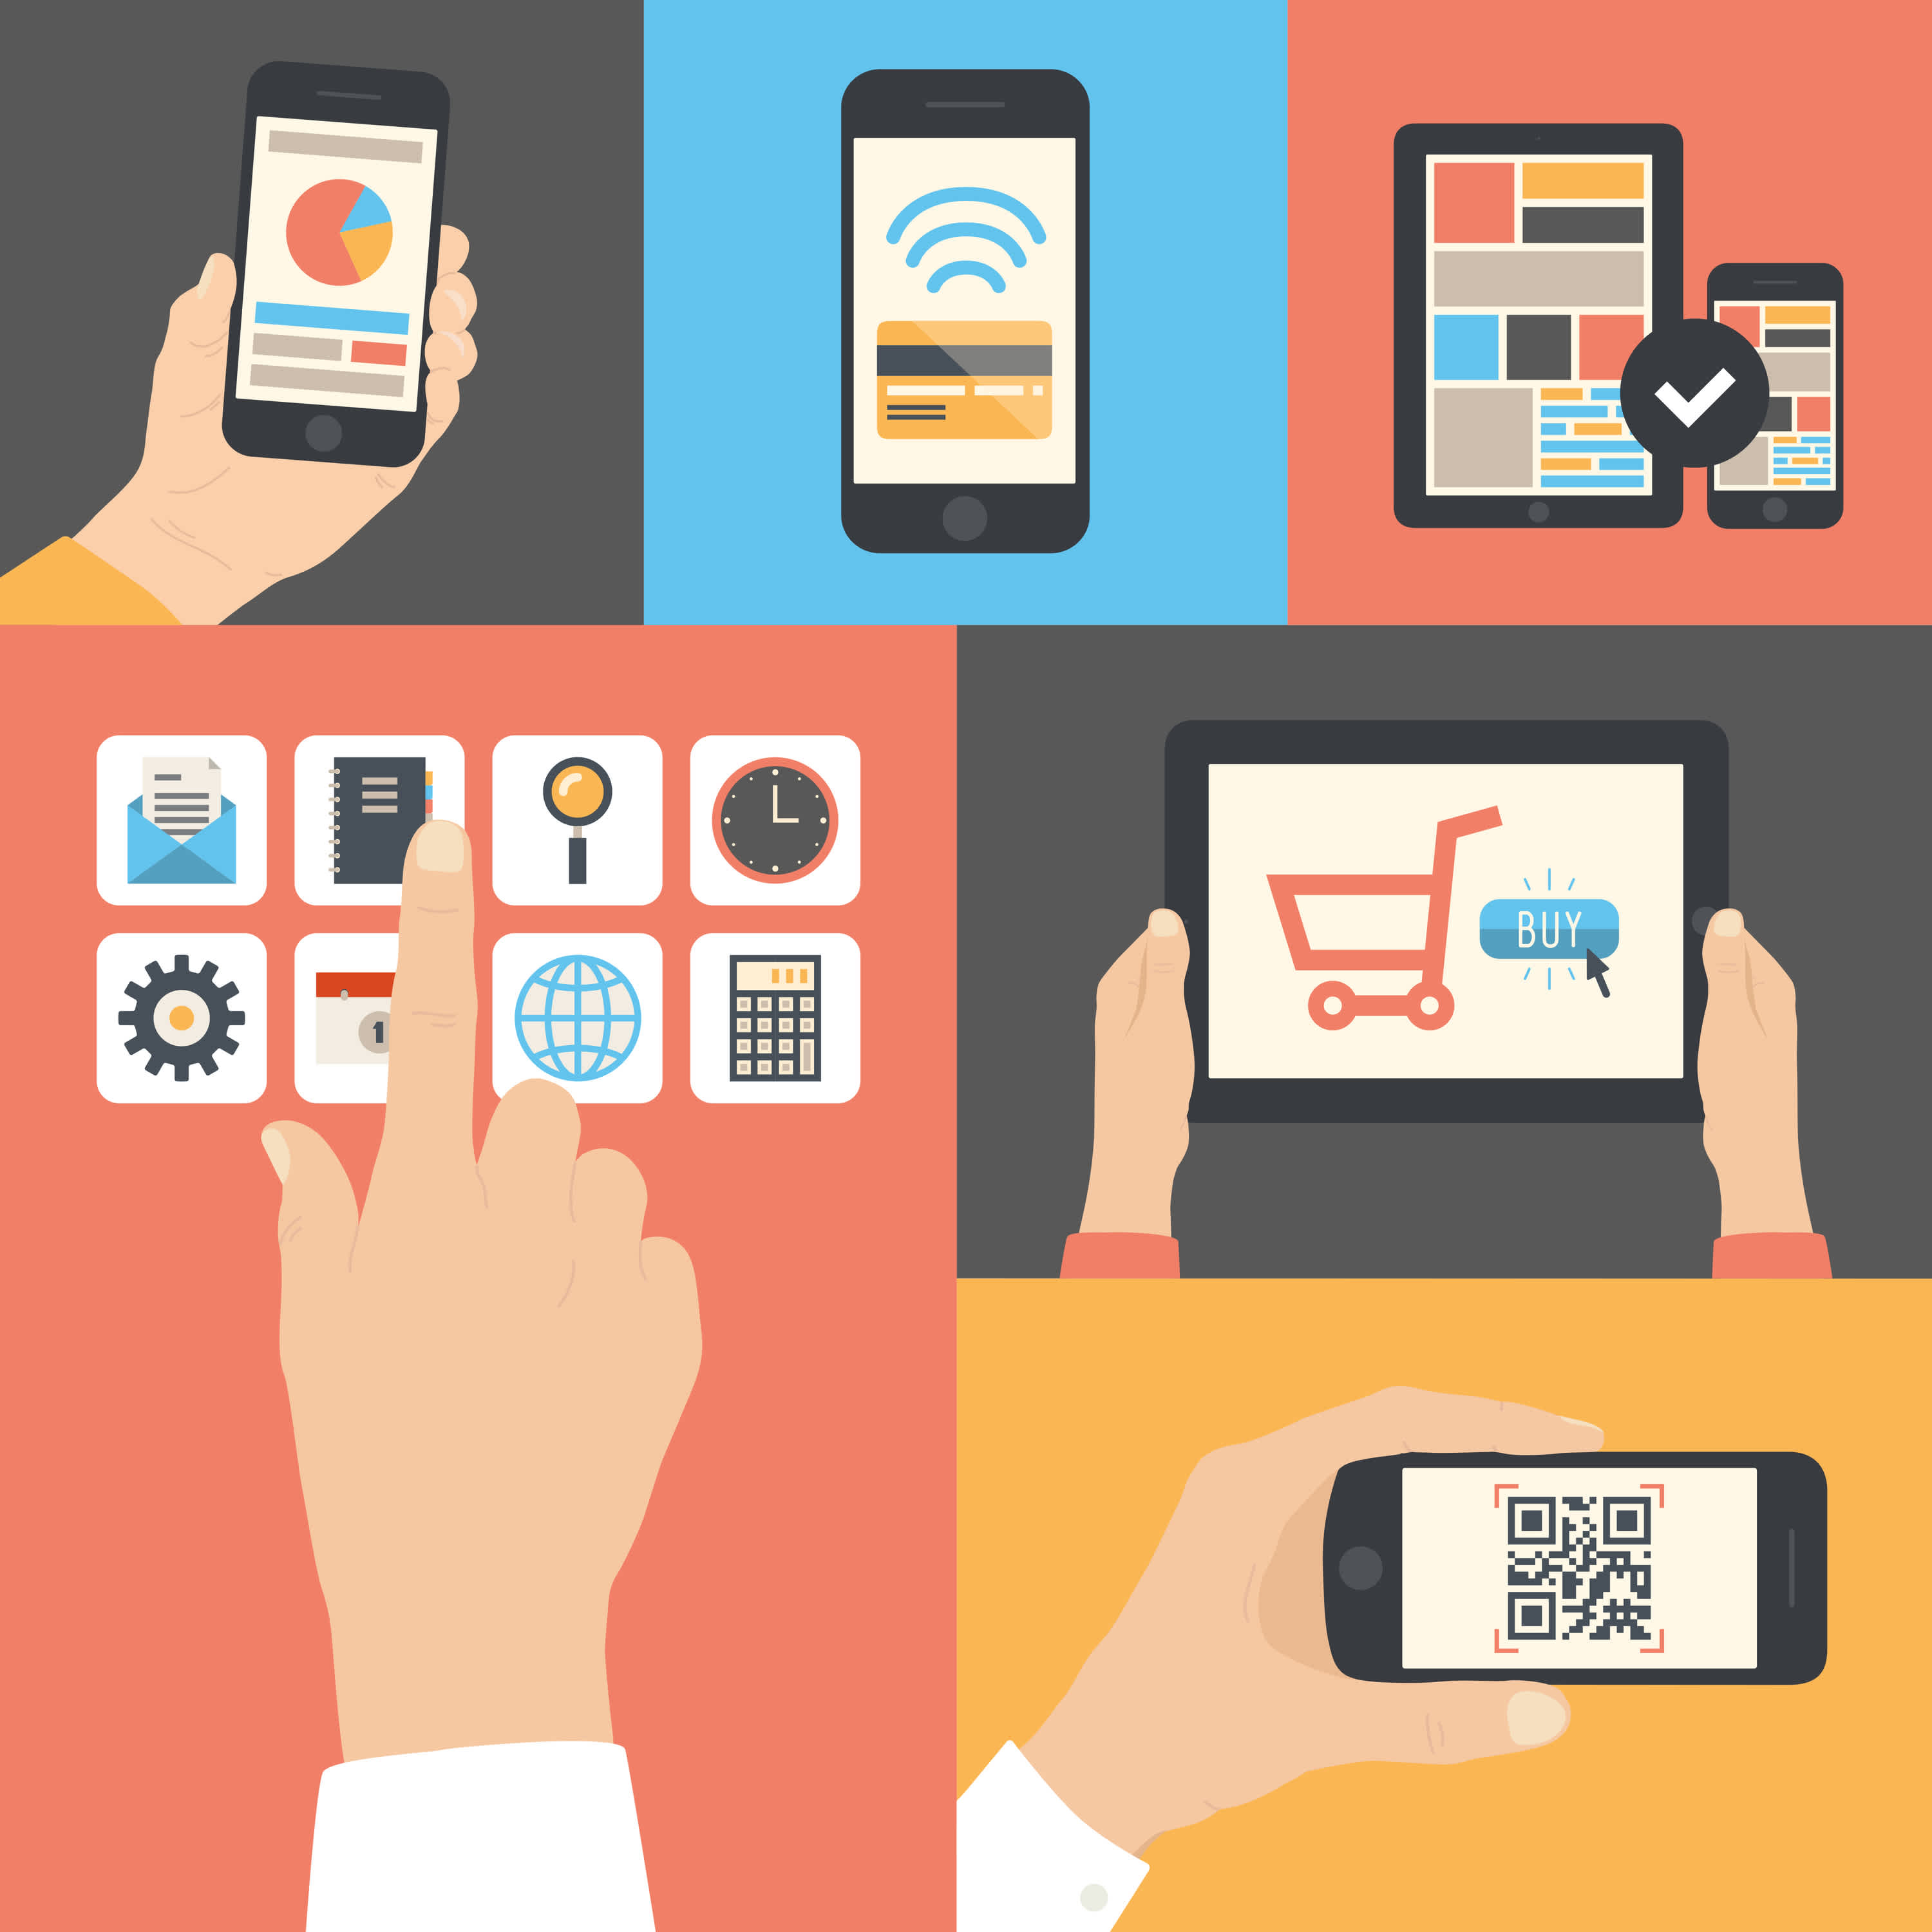 Magento Omnichannel marketing: It's all about the customer